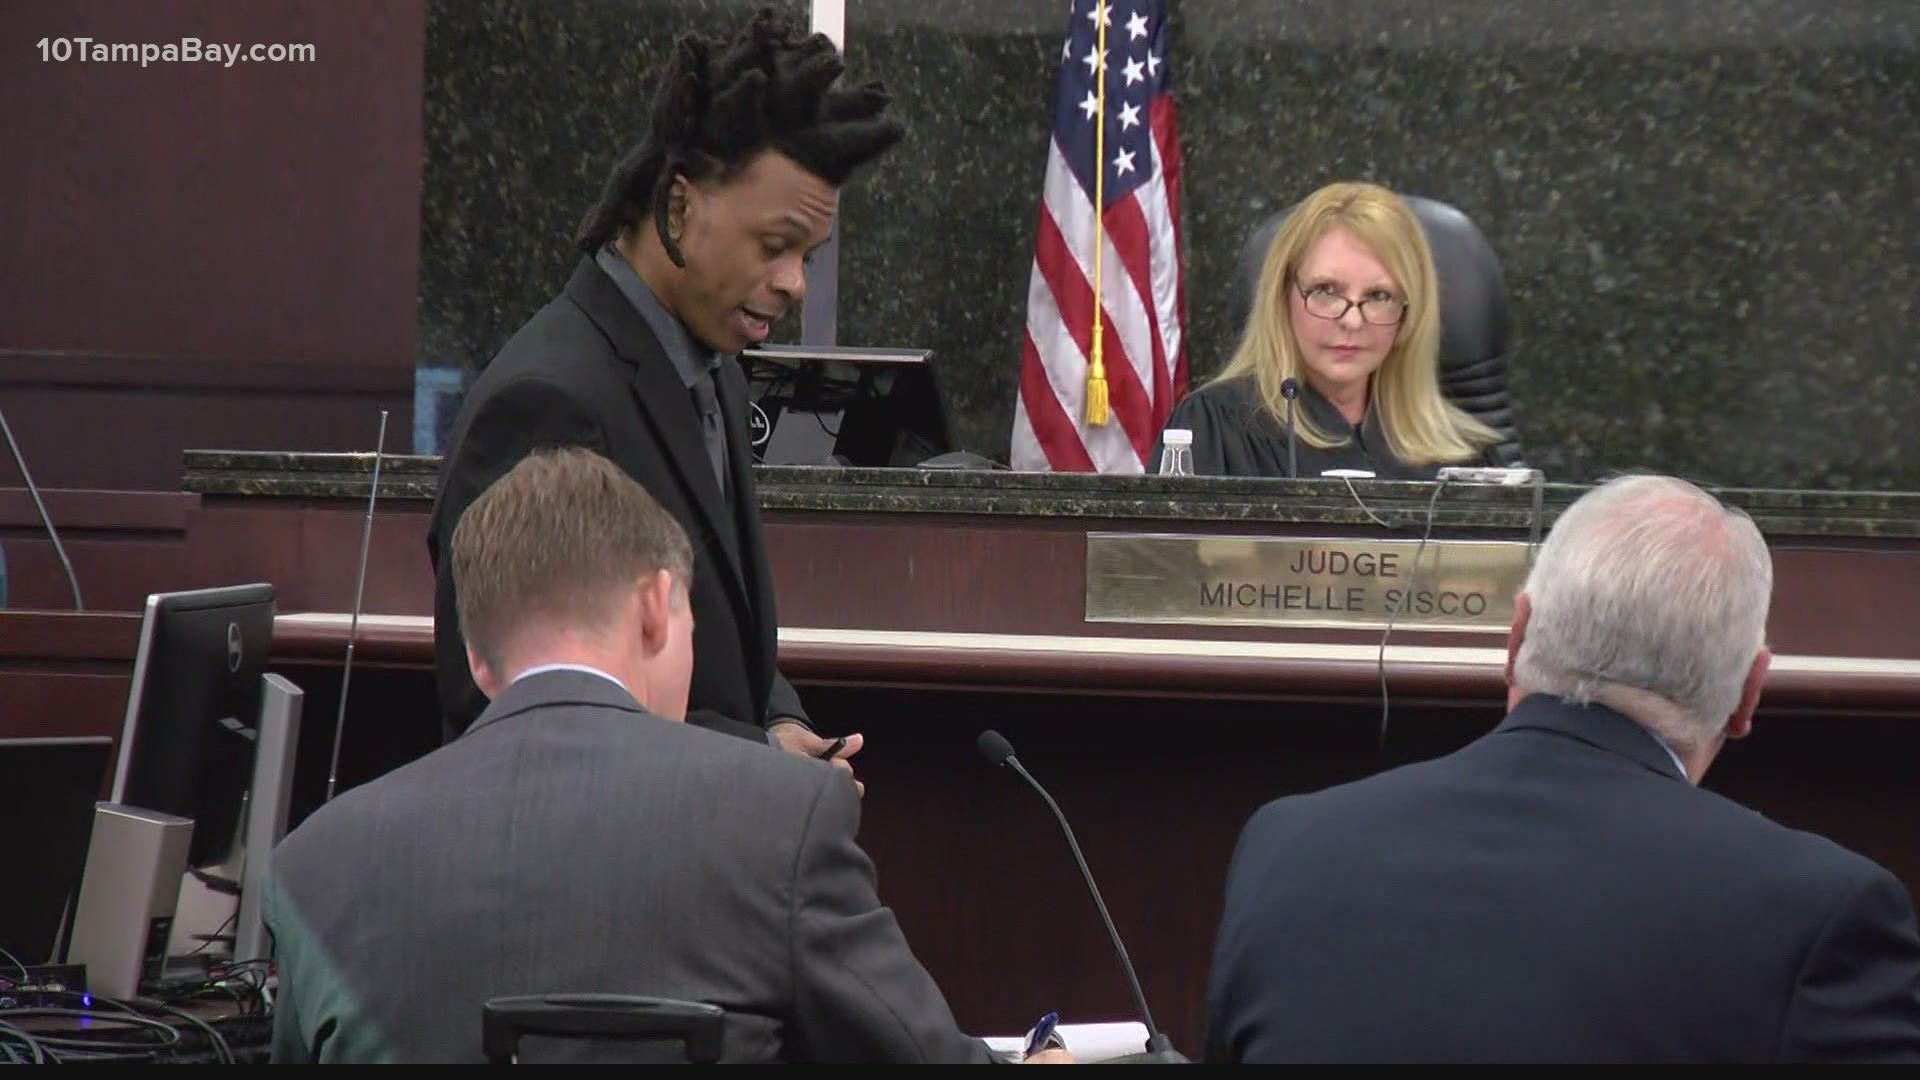 The now 11-year-old son of Ronnie Oneal tells the jury what he remembers from the evening of March 18, 2018.